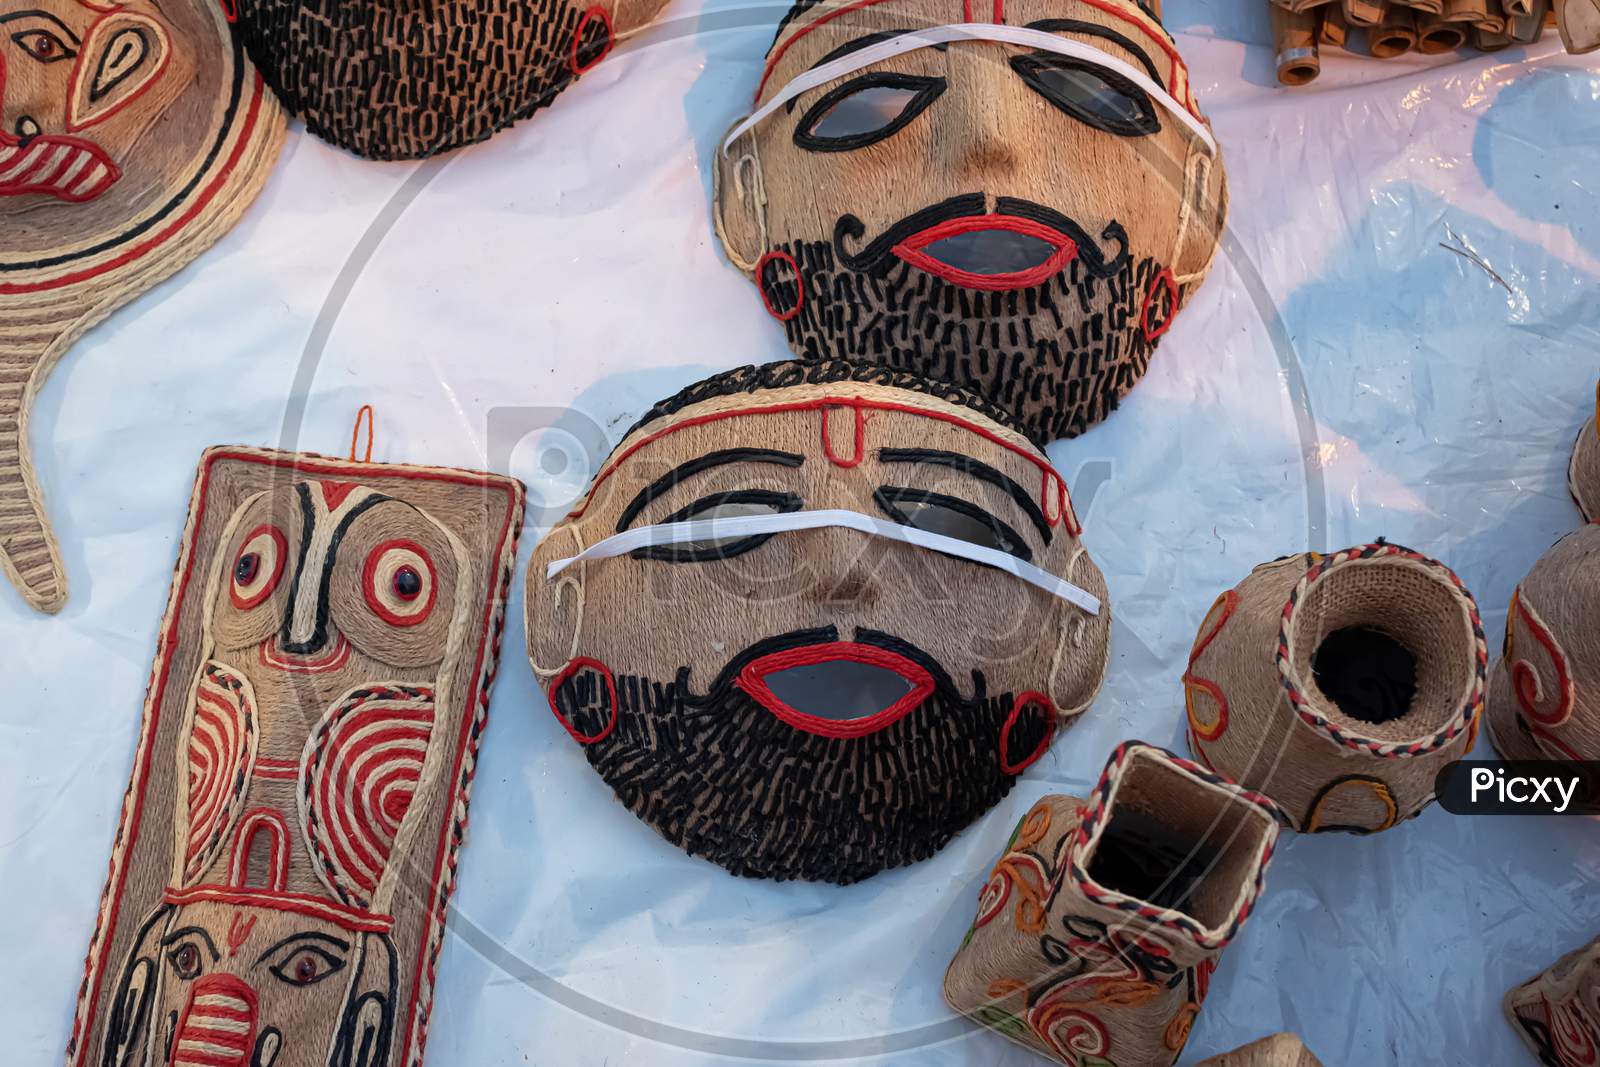 Beautiful Handmade Mask Made By Jute Is Displayed In A Shop For Sale In Blurred Background. Indian Handicraft